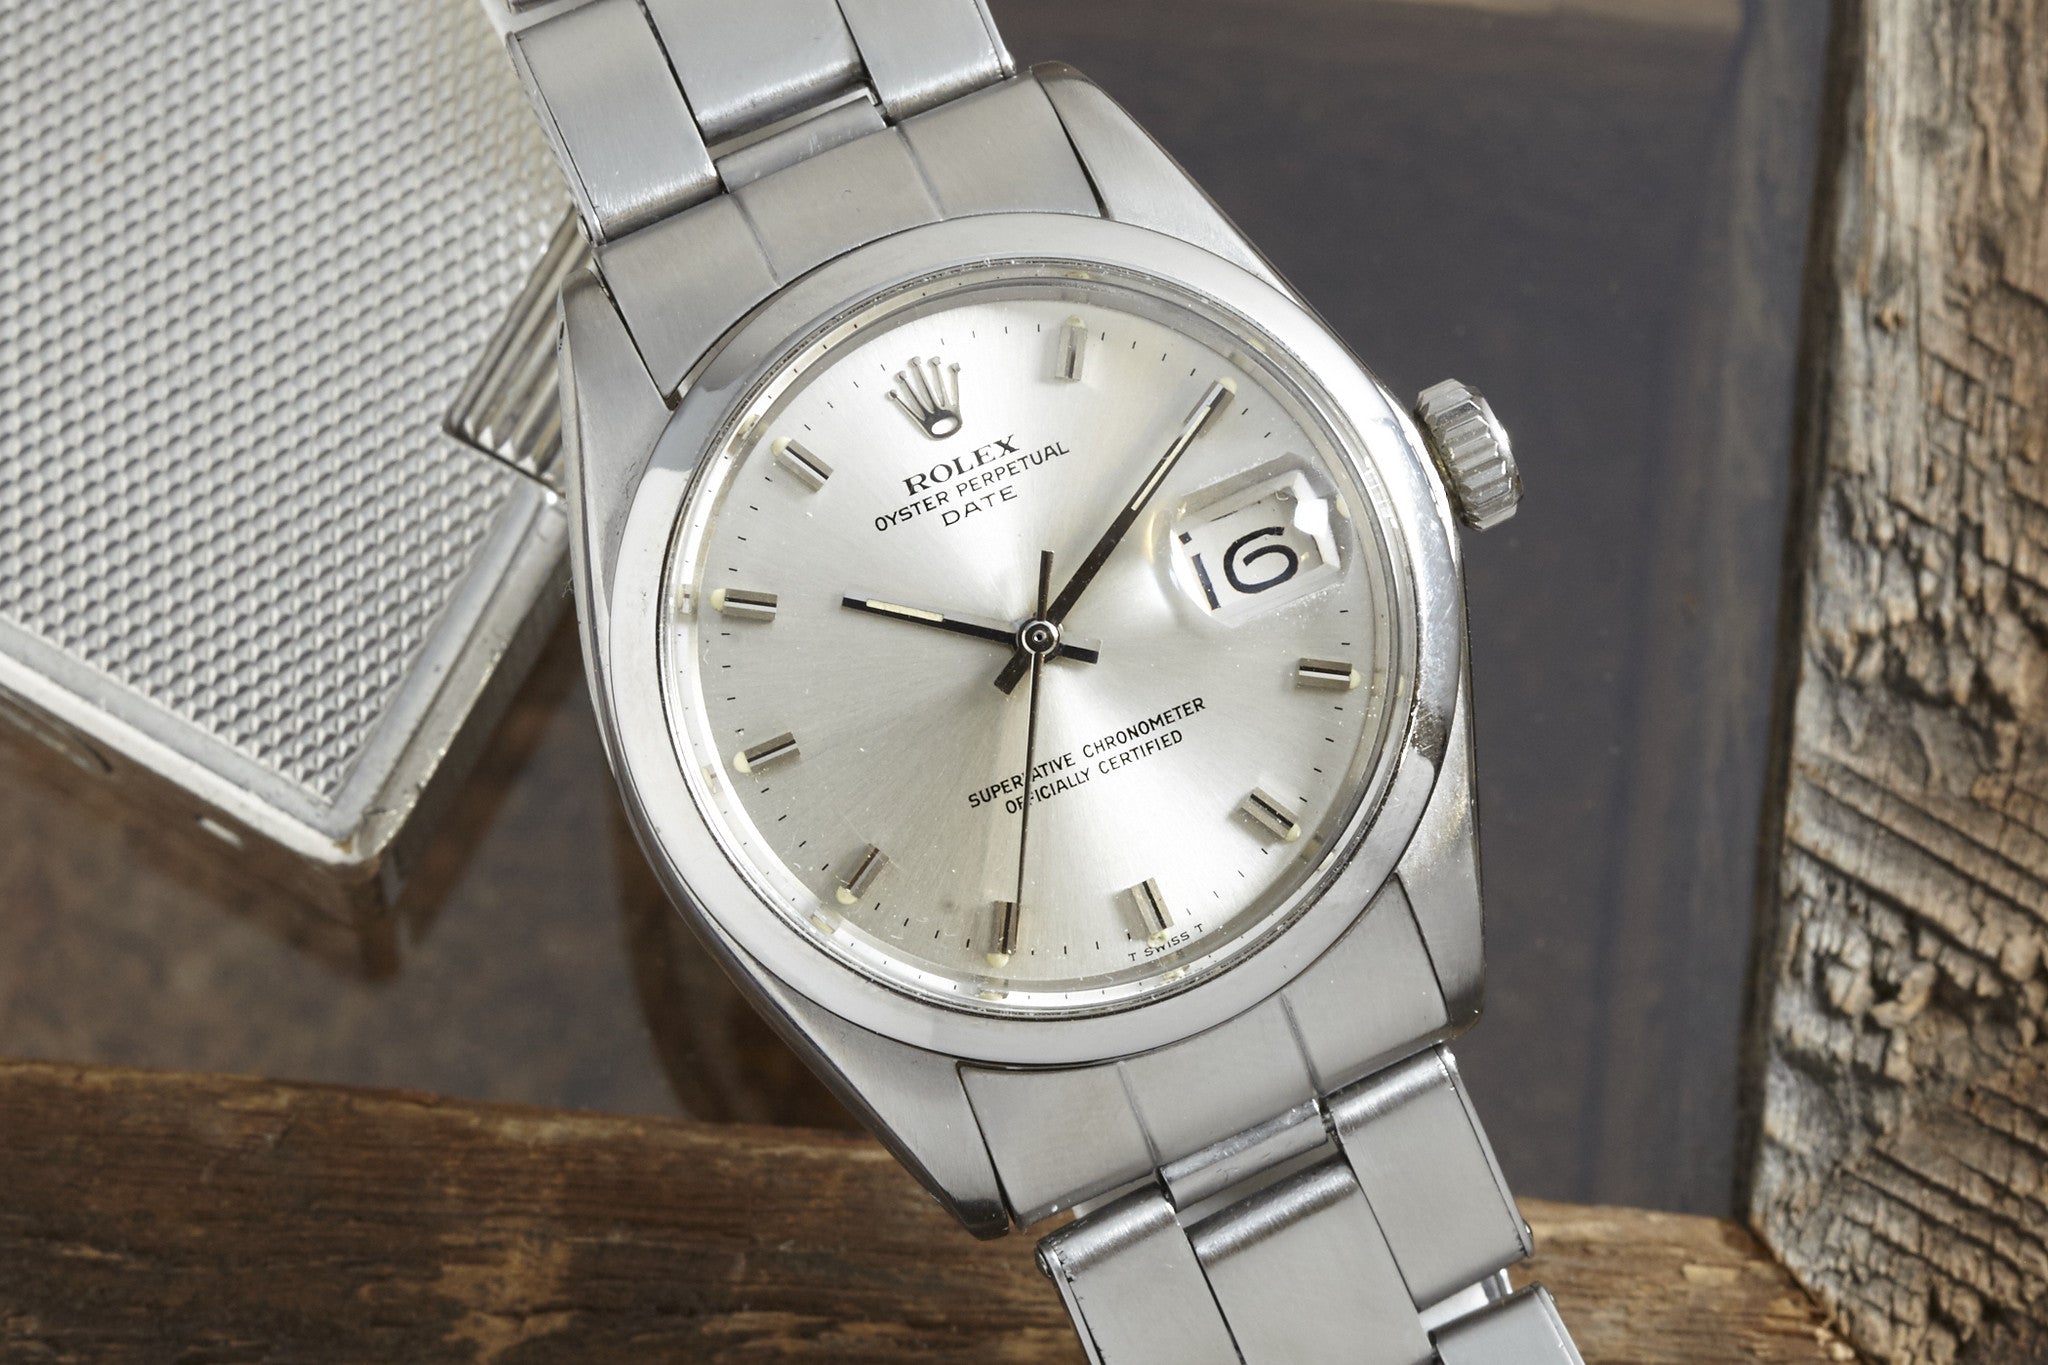 Velkendt alliance Comorama Rolex Oyster Perpetual Date – Analog:Shift